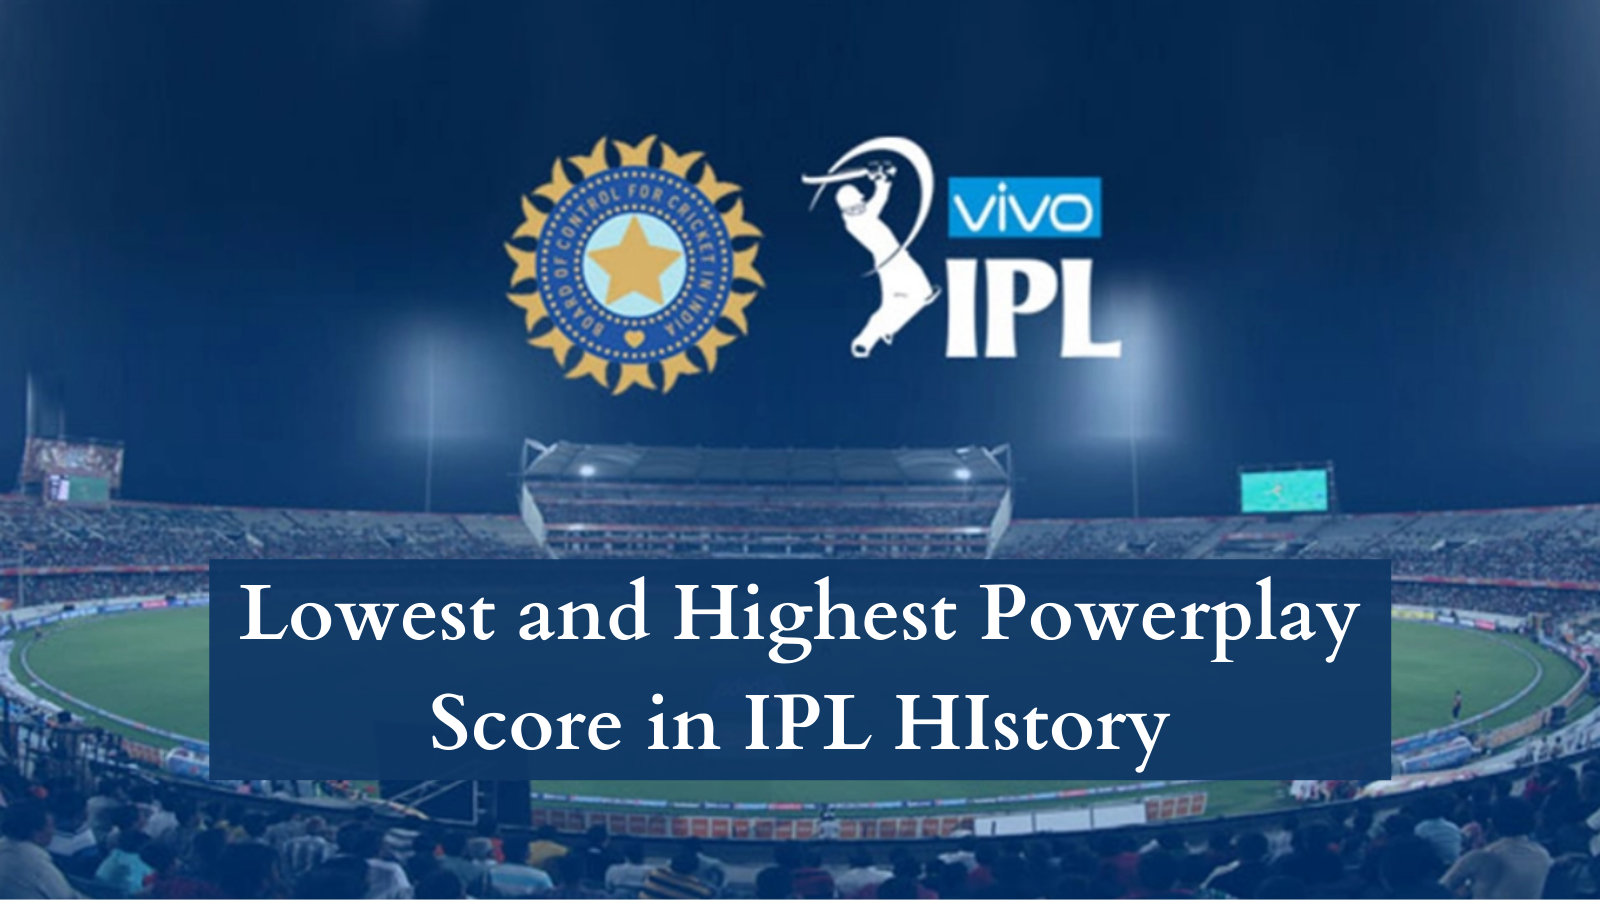 Lowest and Highest Powerplay Score in IPL HIstory